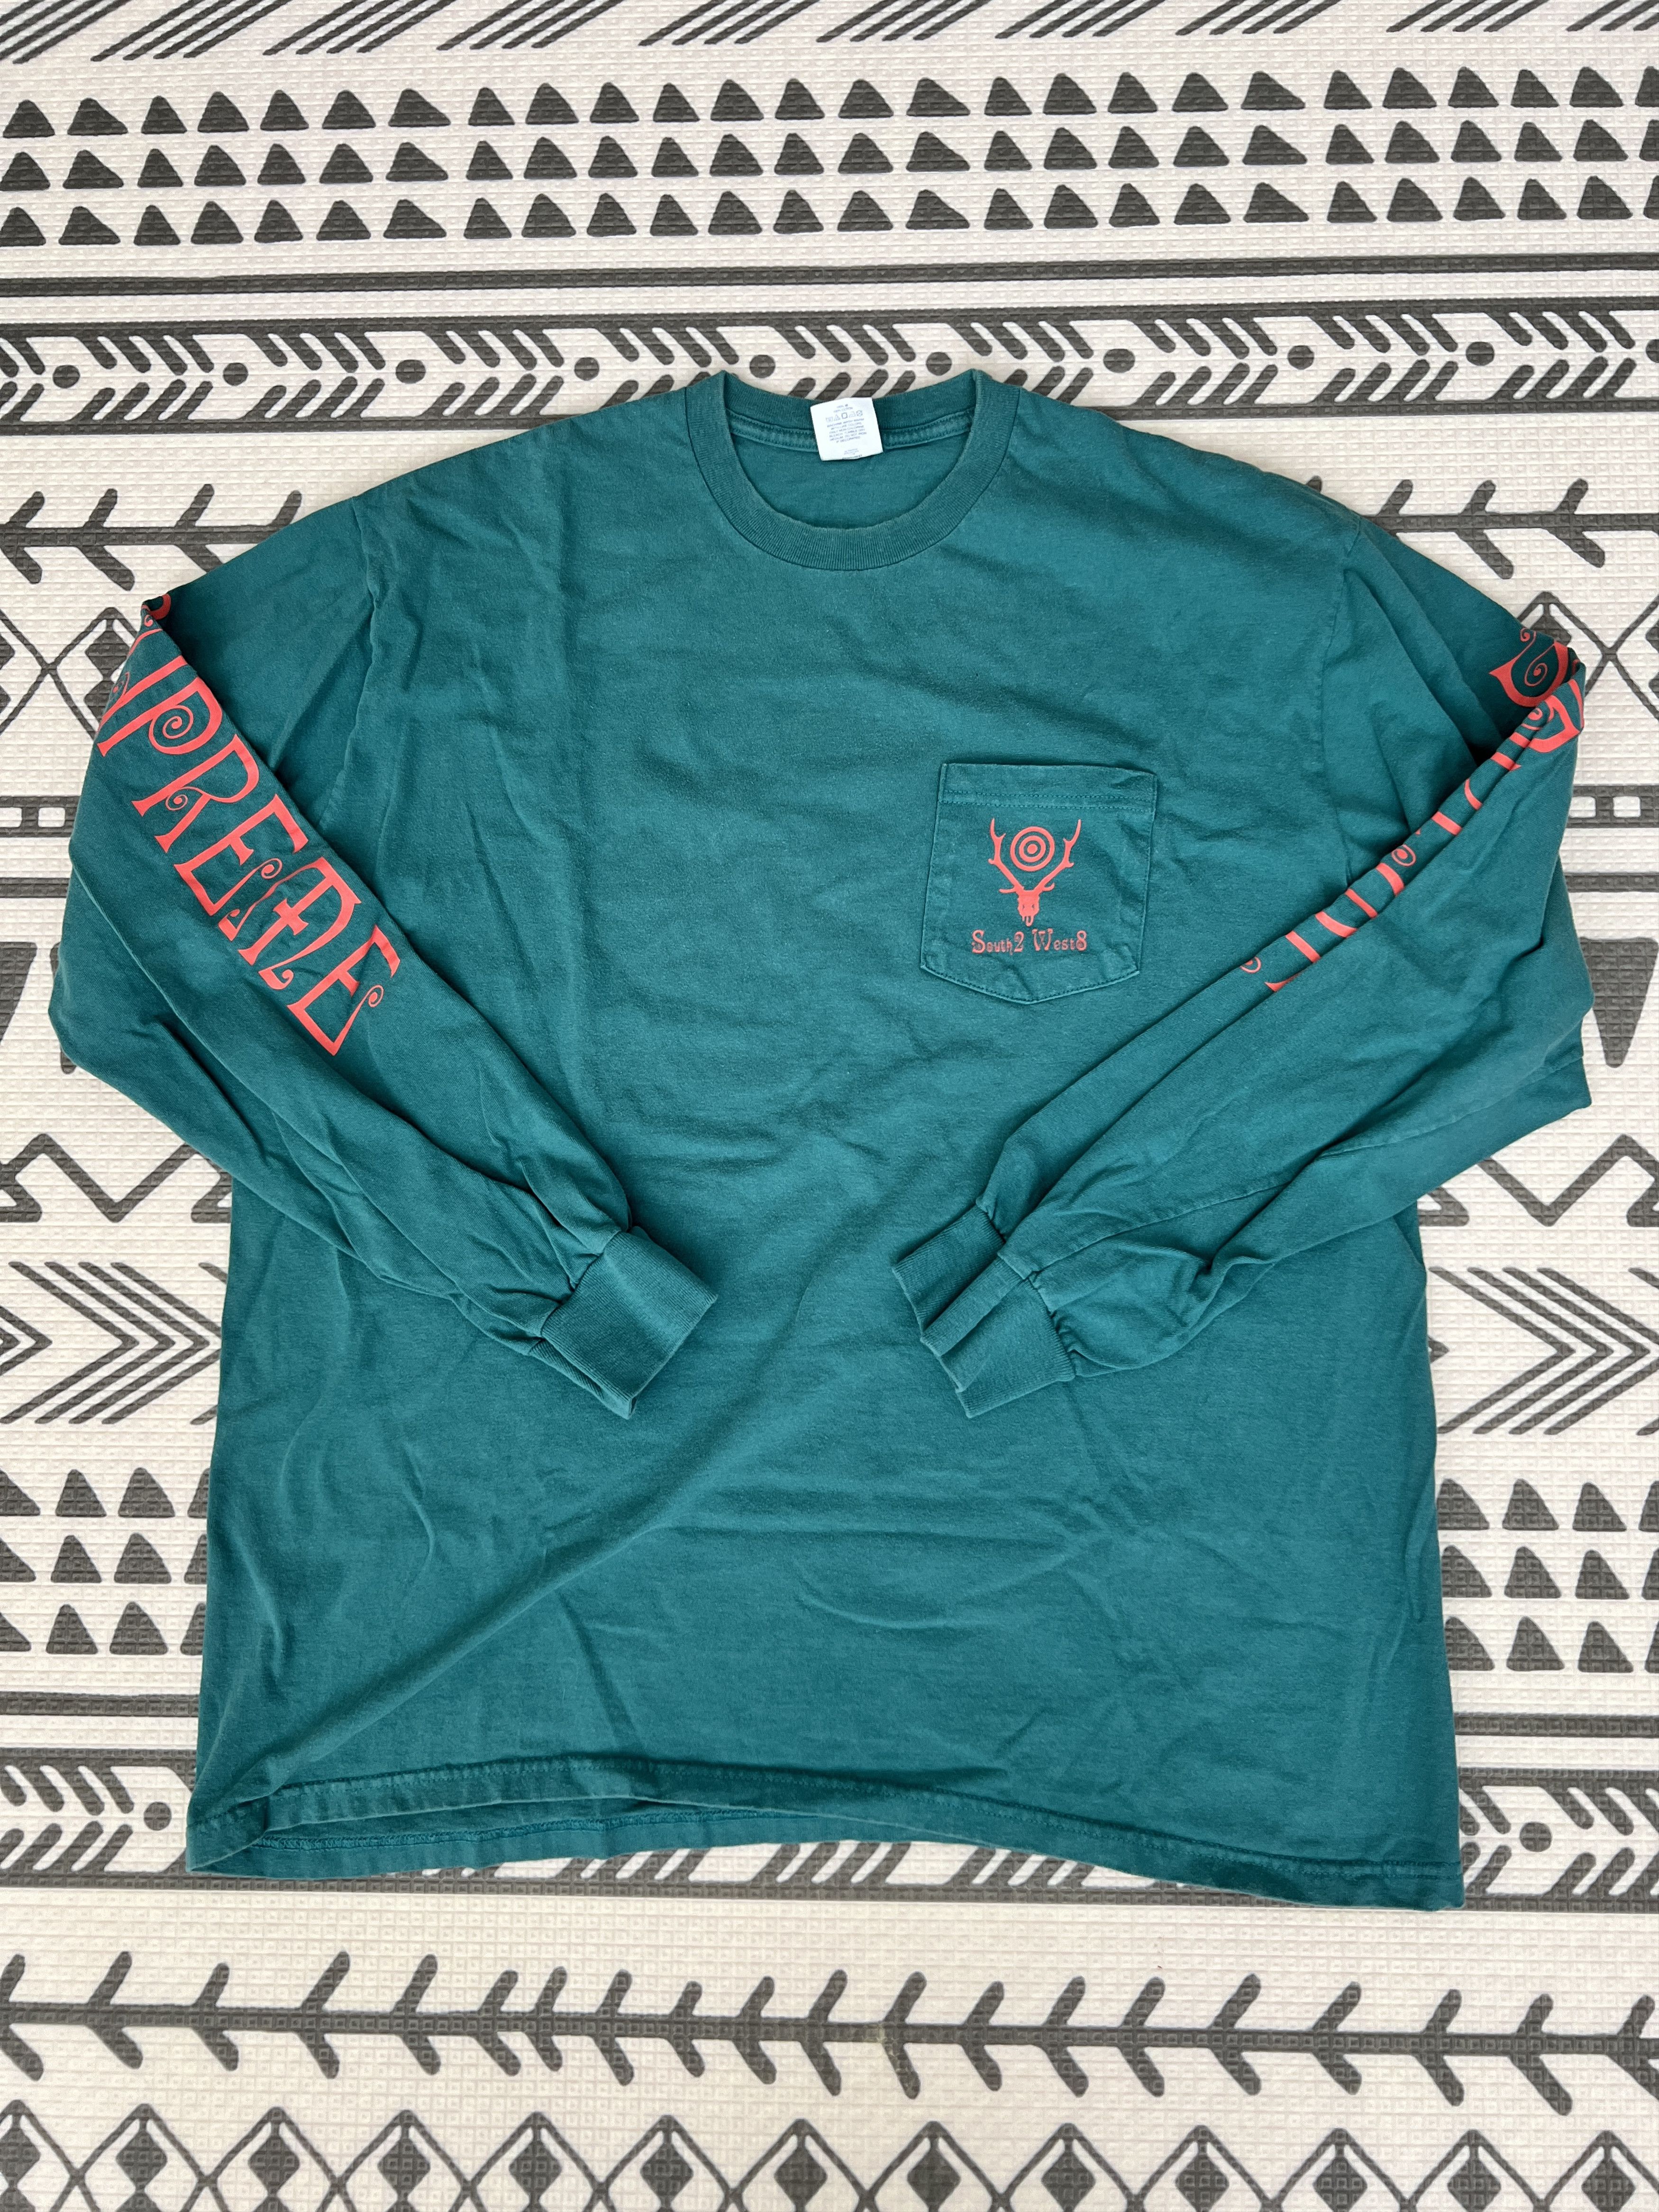 Supreme Supreme x South2 West8 Long Sleeve T-Shirt Teal Size XL | Grailed